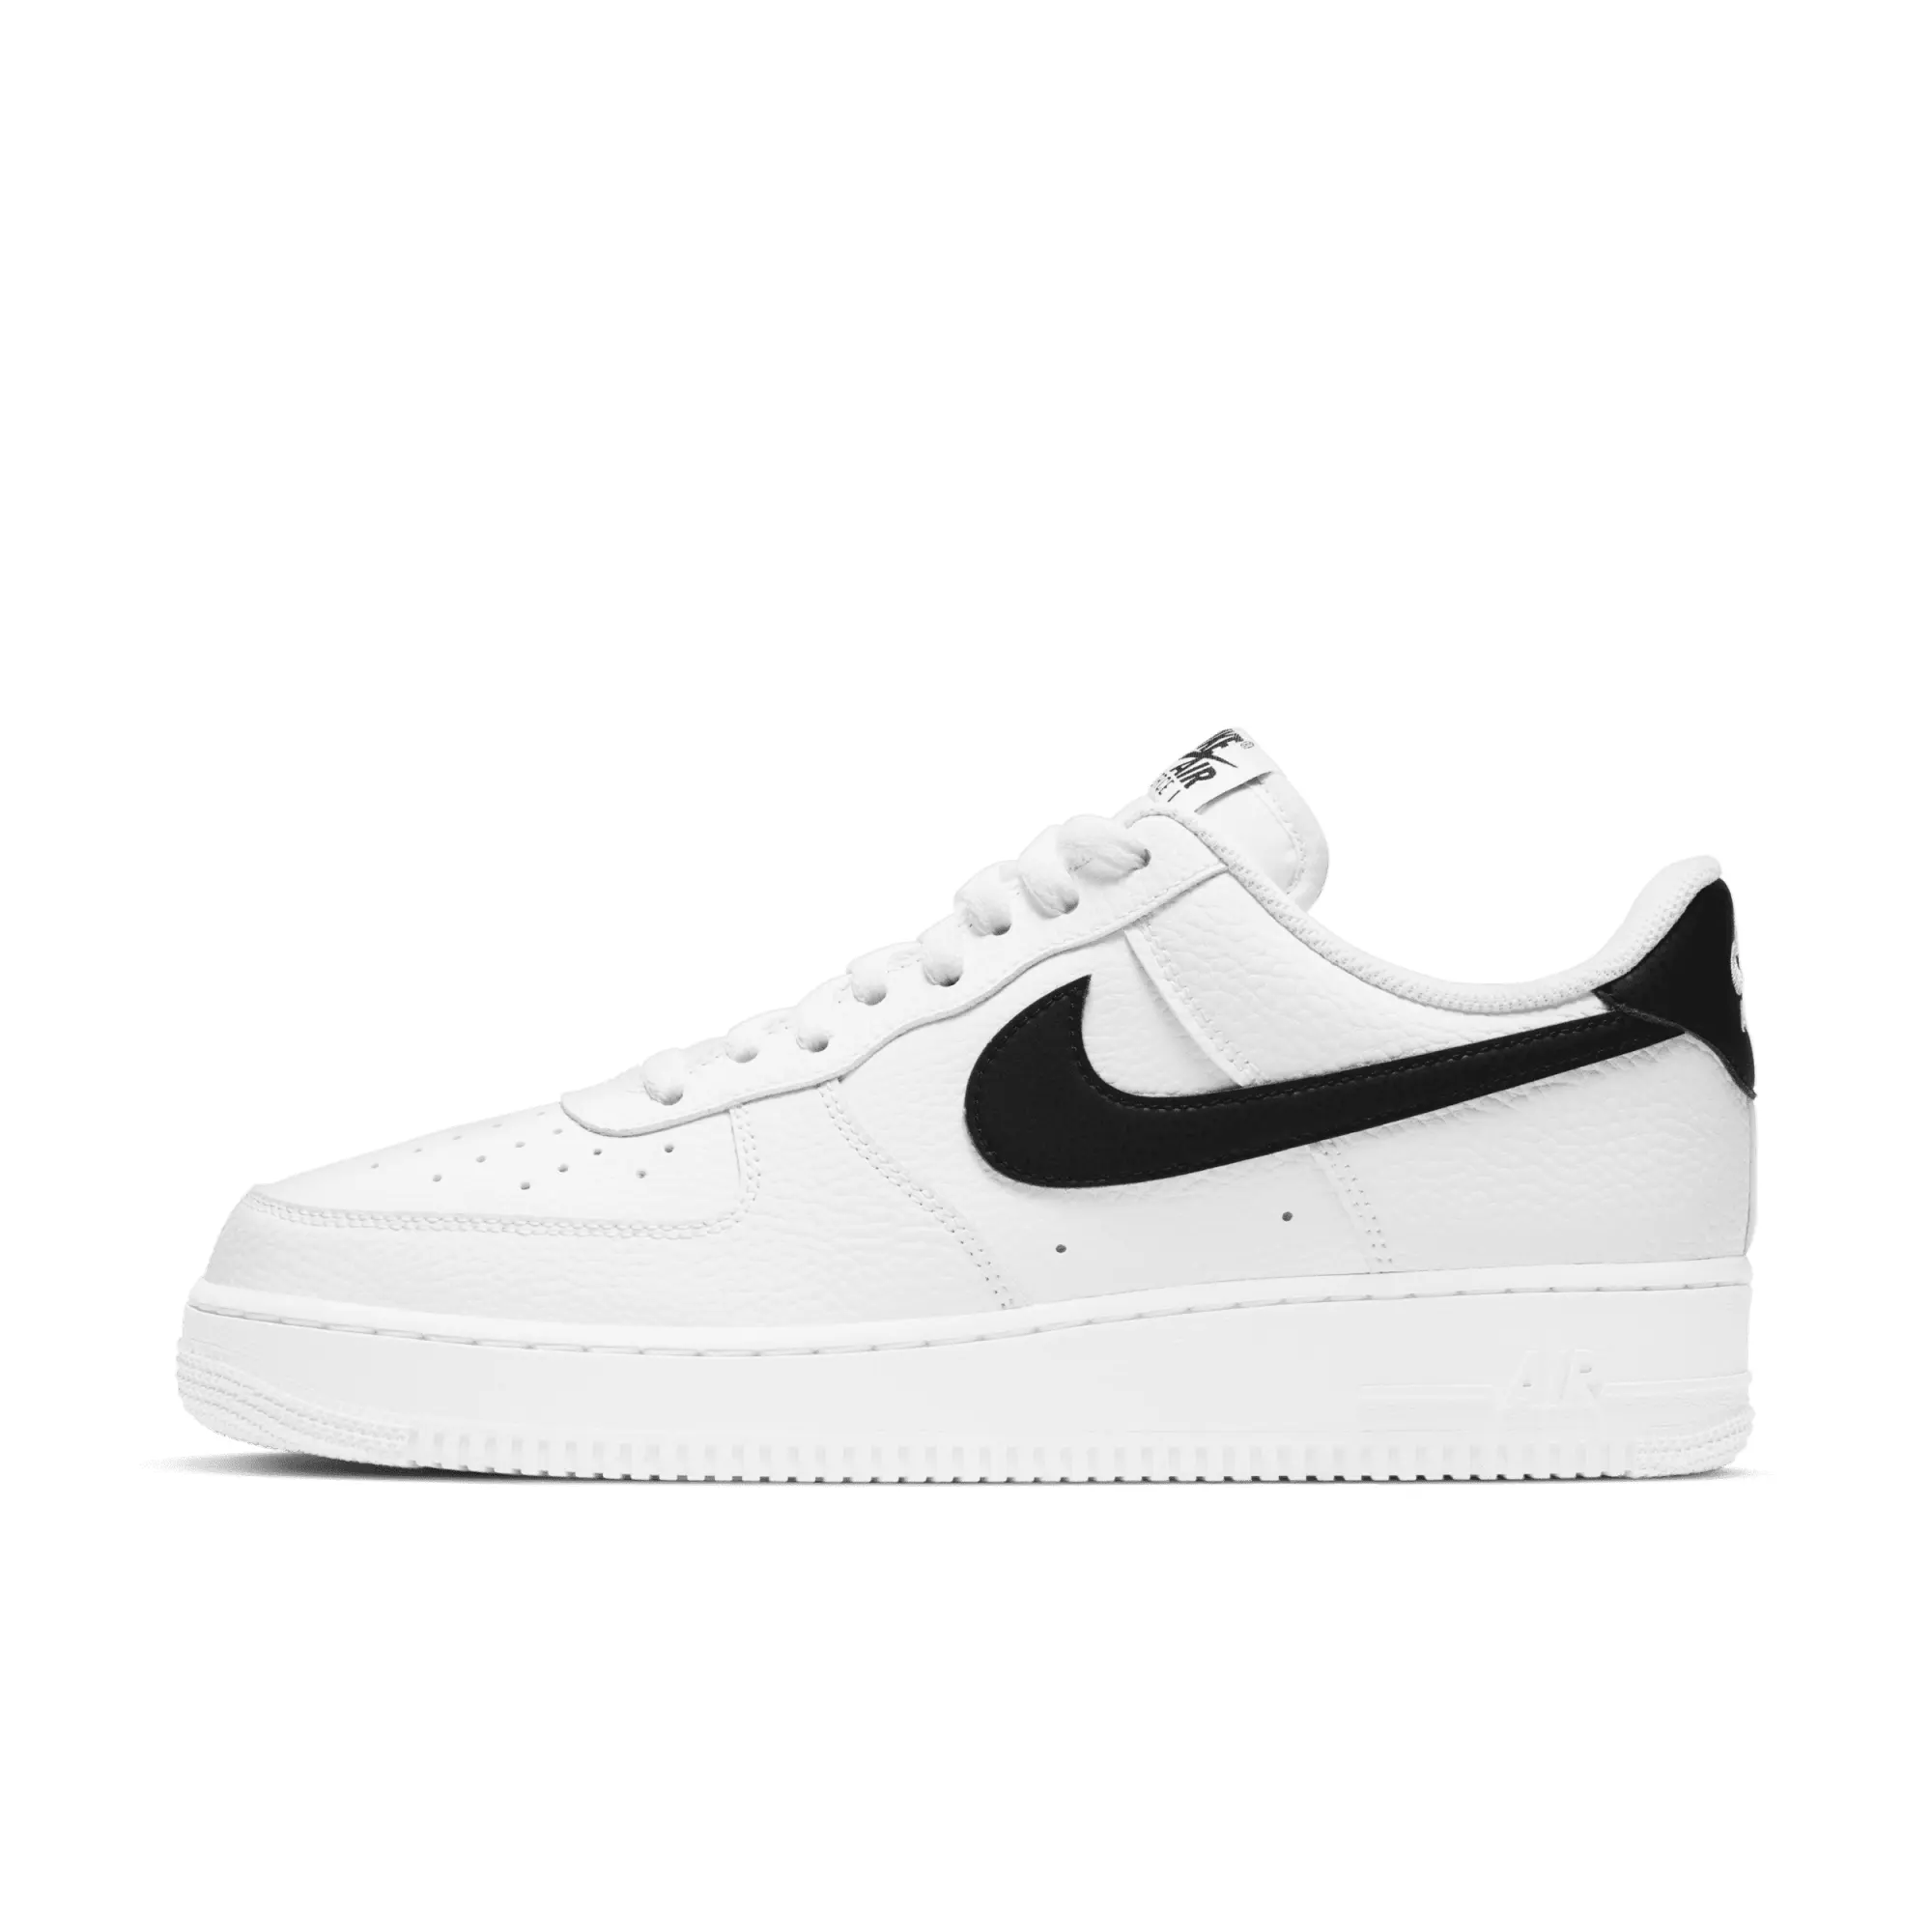 Nike Unisex Air Force 1 '07 AN20 Trainers White/Black